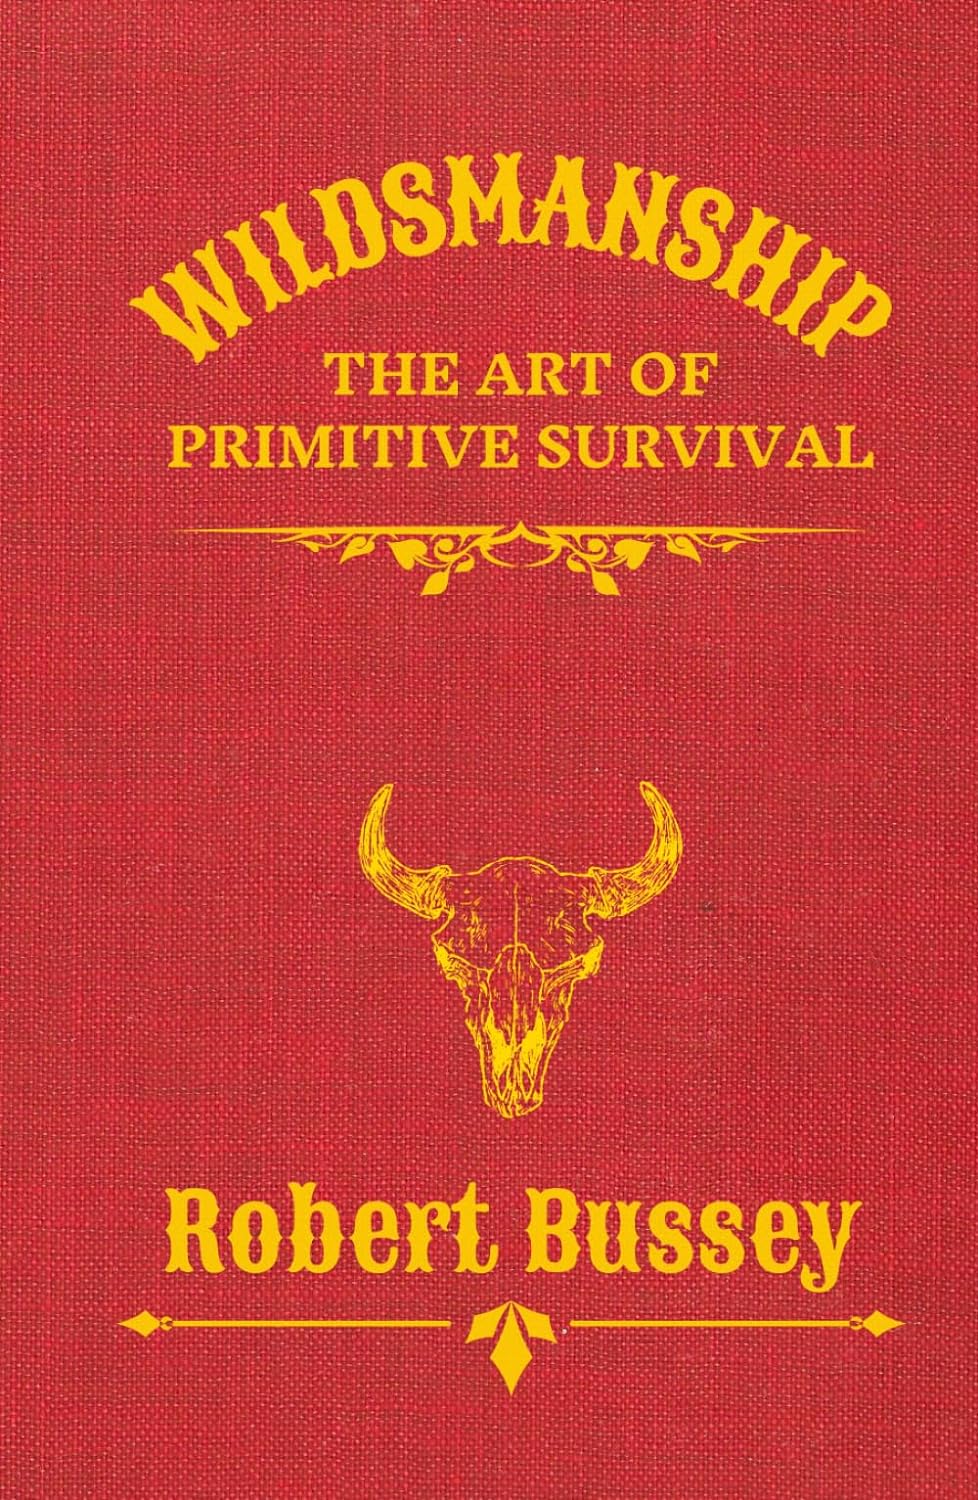 Wildsmanship: The Art of Primitive Survival Book by Robert Bussey (Hardcover)